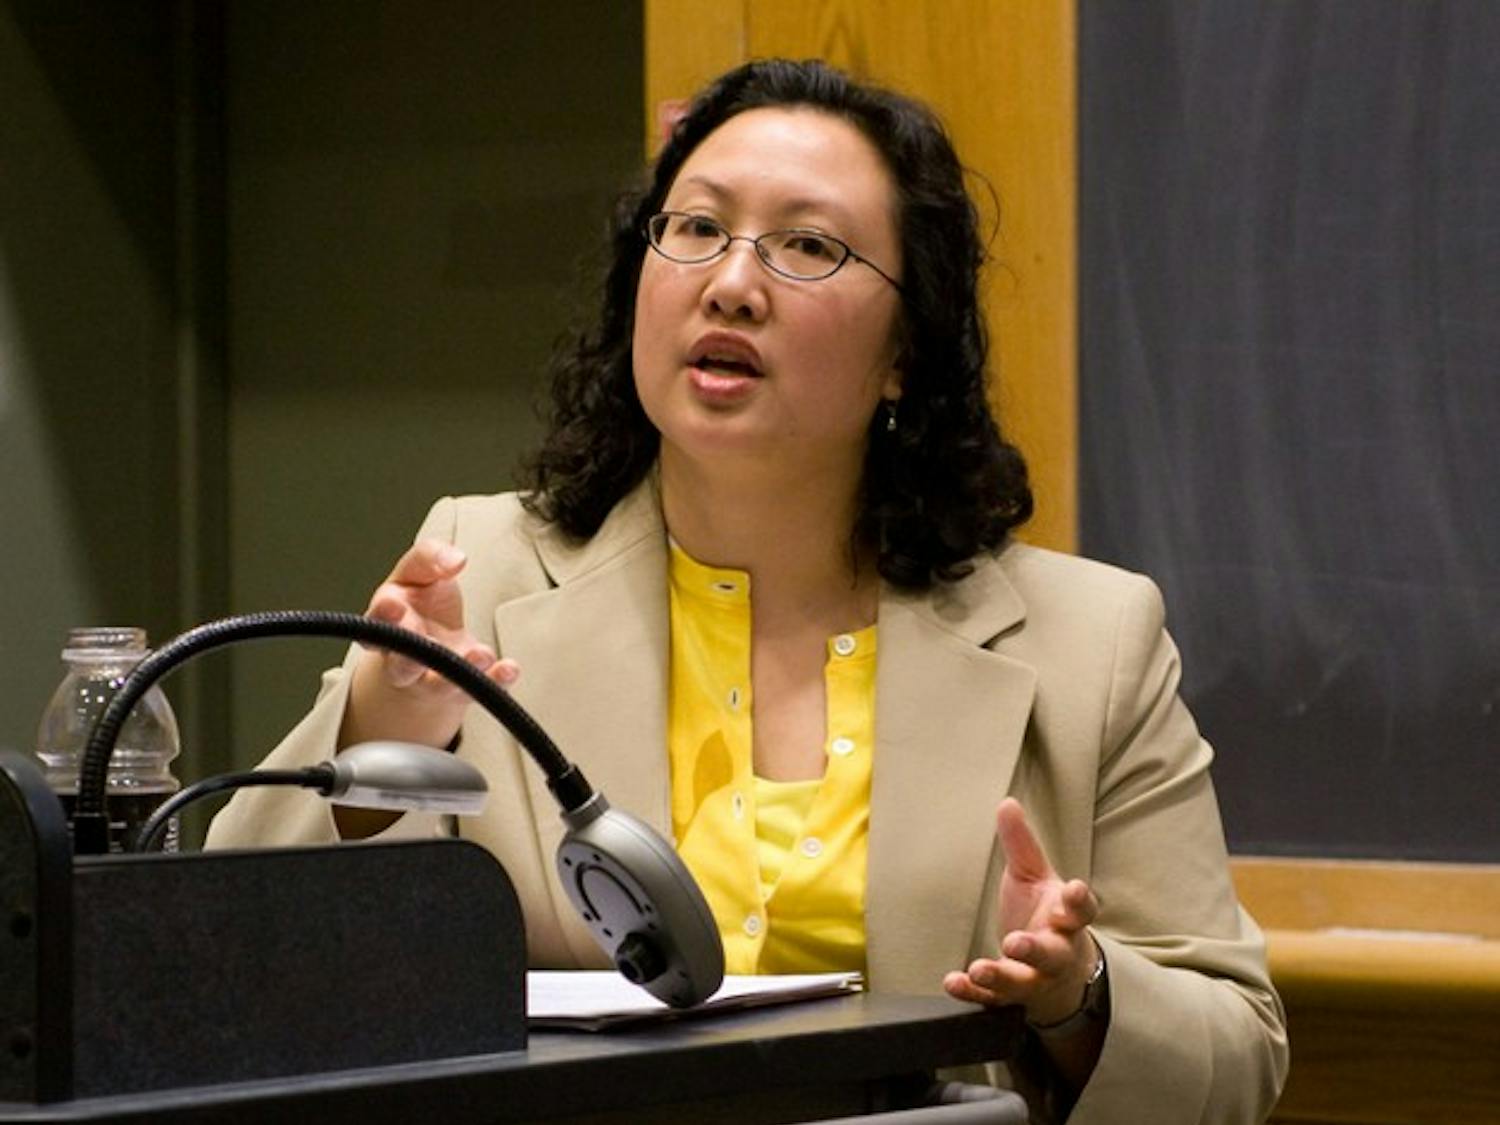 Anna Hui, the first Asian American Associate Deputy Secretary of Labor, encouraged students to explore different careers in a lecture on Monday.